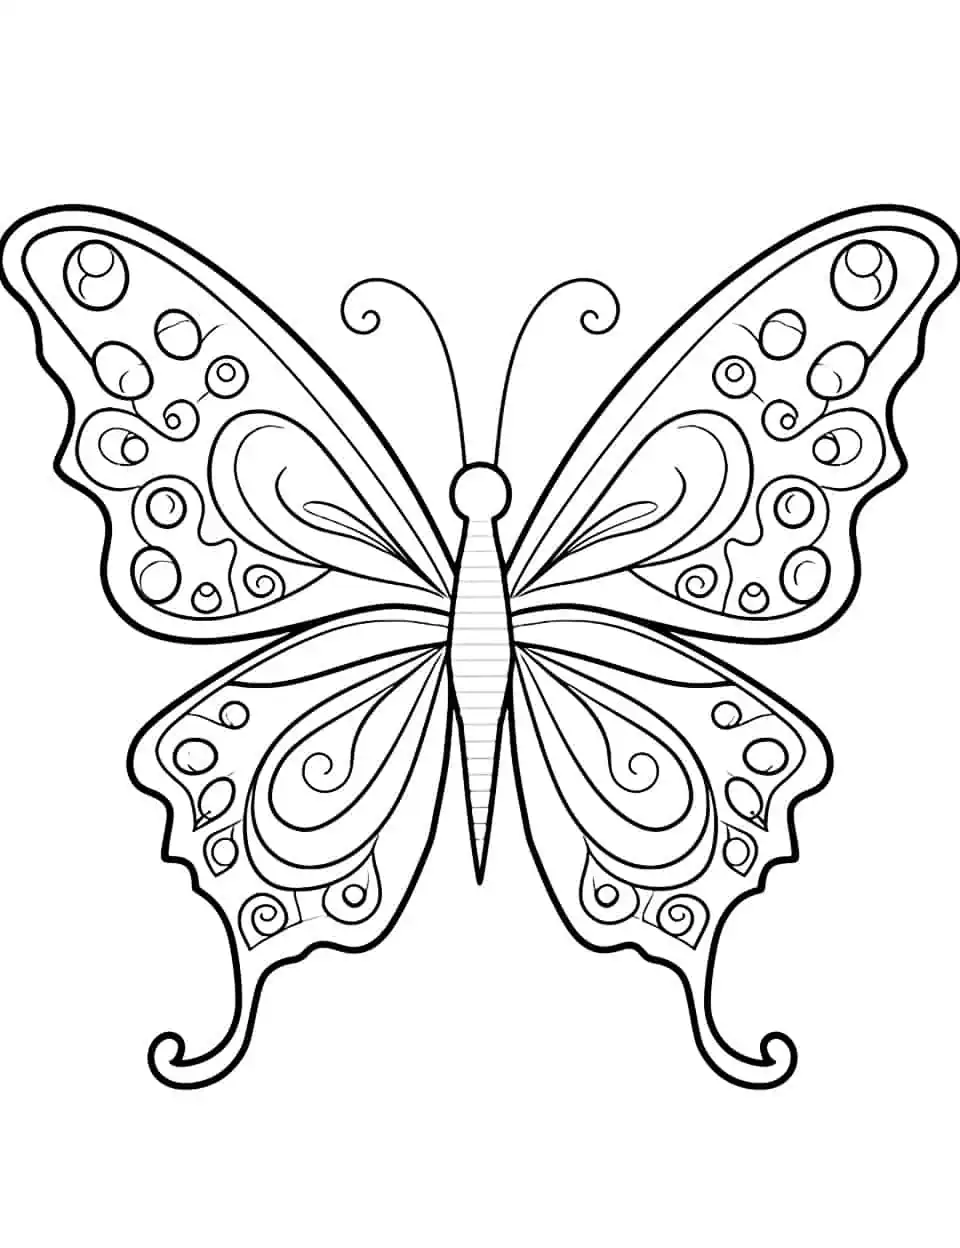 Fluttering Elegance Butterfly Coloring Page - A detailed coloring page featuring a graceful butterfly with intricate wing patterns.